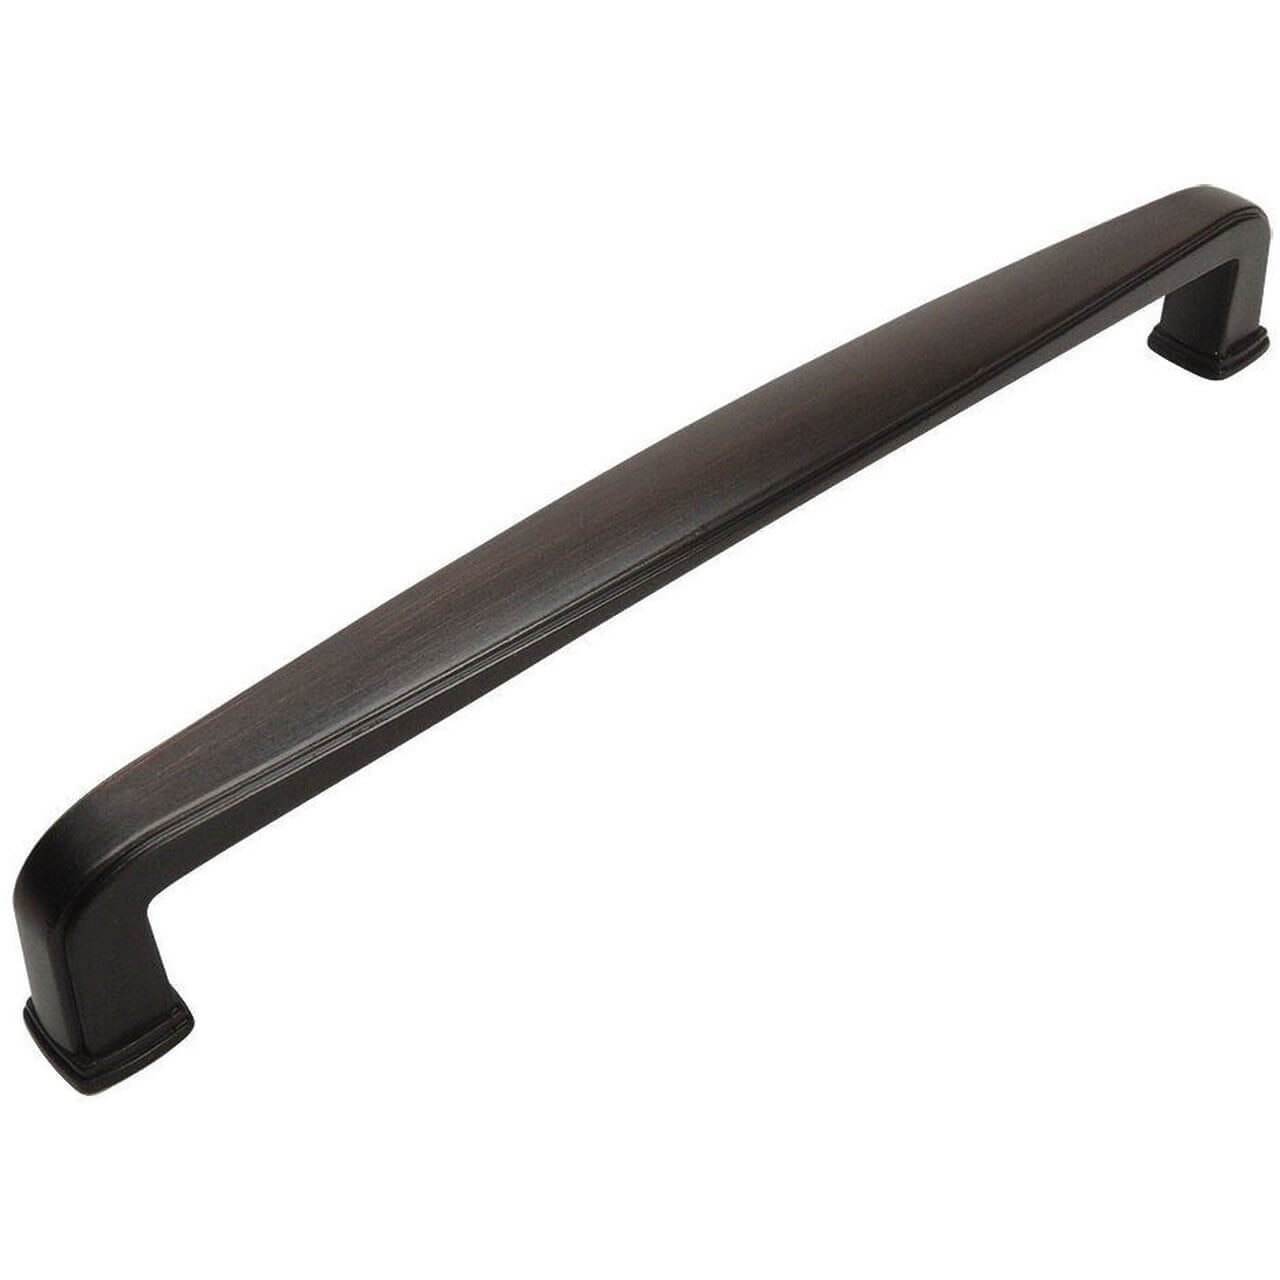 Cabinet pull in oil rubbed bronze finish with seven and a half inch hole spacing